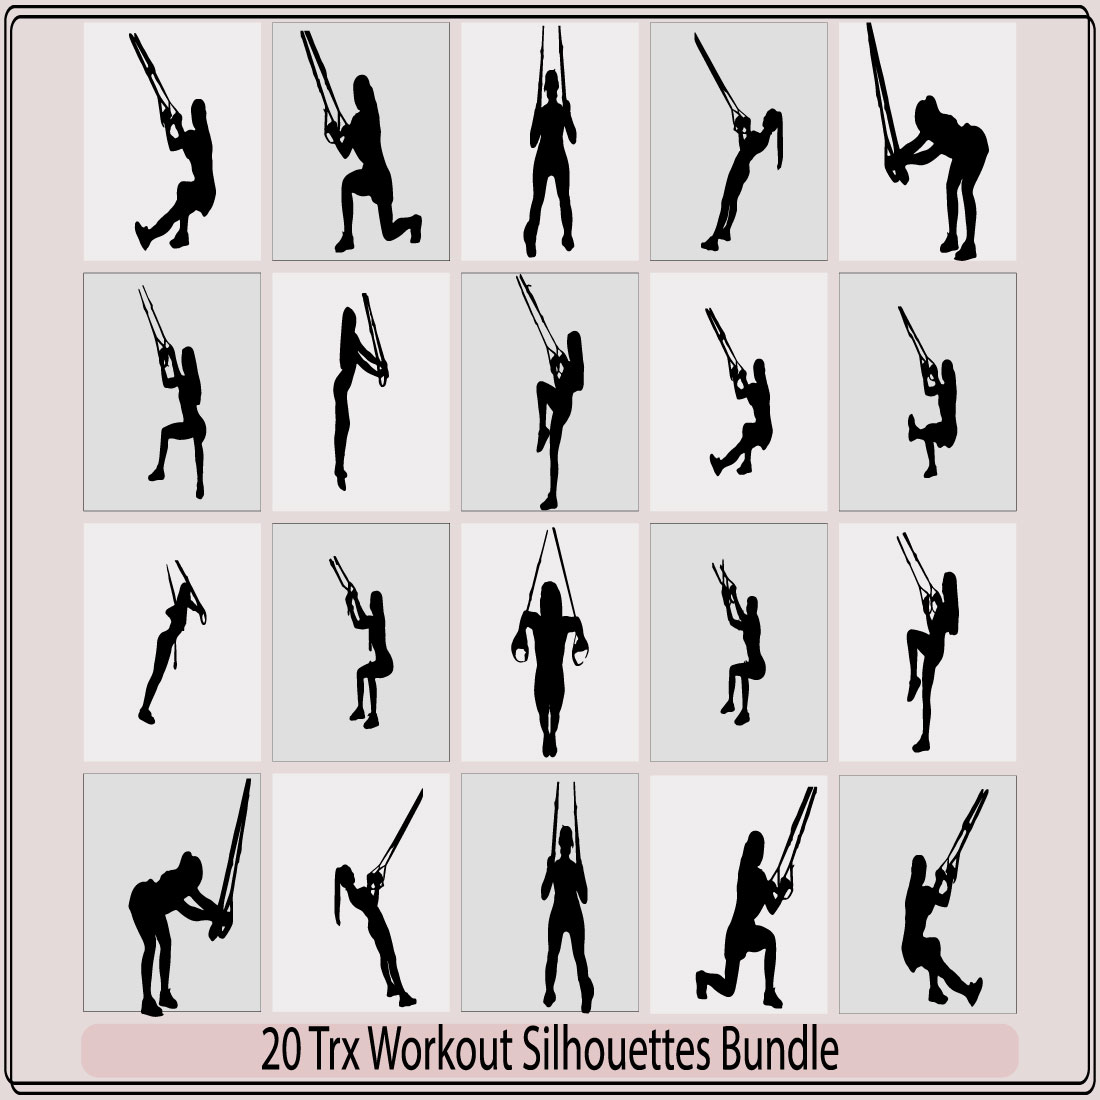 Silhouettes of men and women doing TRX exercises,Man workout using resistance band flat vector illustration,suspension training system TRX, vector illustration preview image.